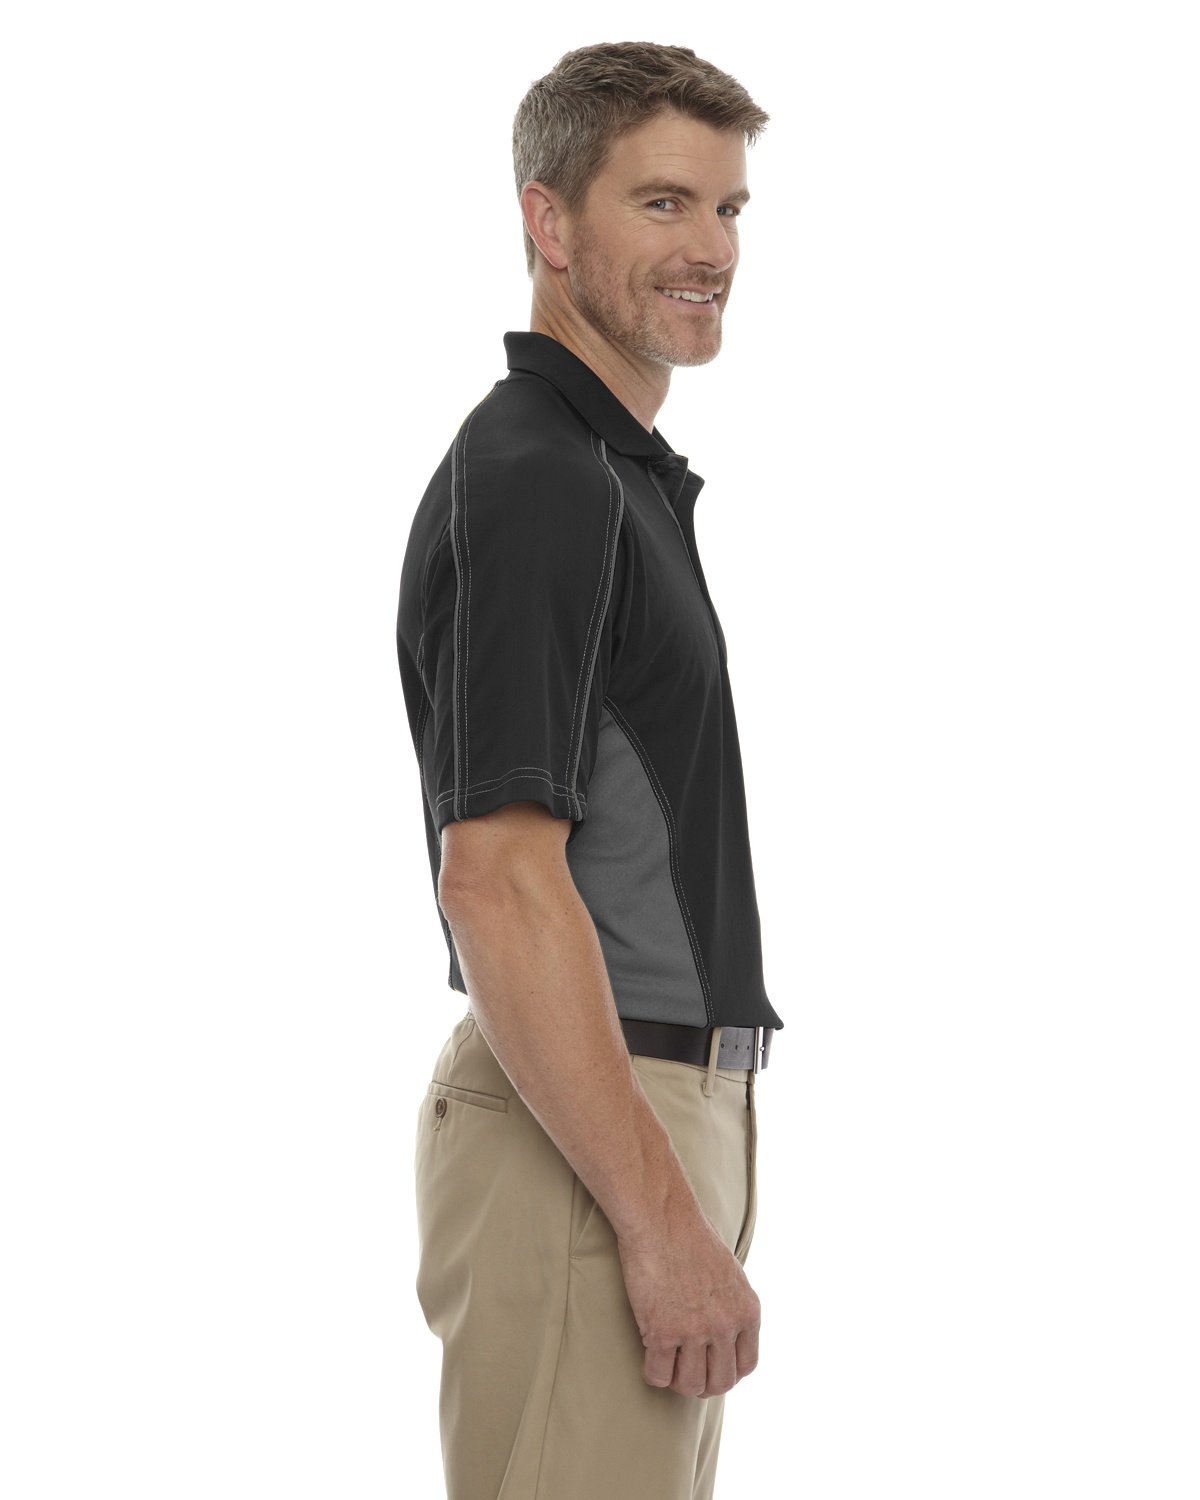 'Ash City - Extreme 85113T Men's Tall Eperformance Fuse Snag Protection Plus Colorblock Polo'